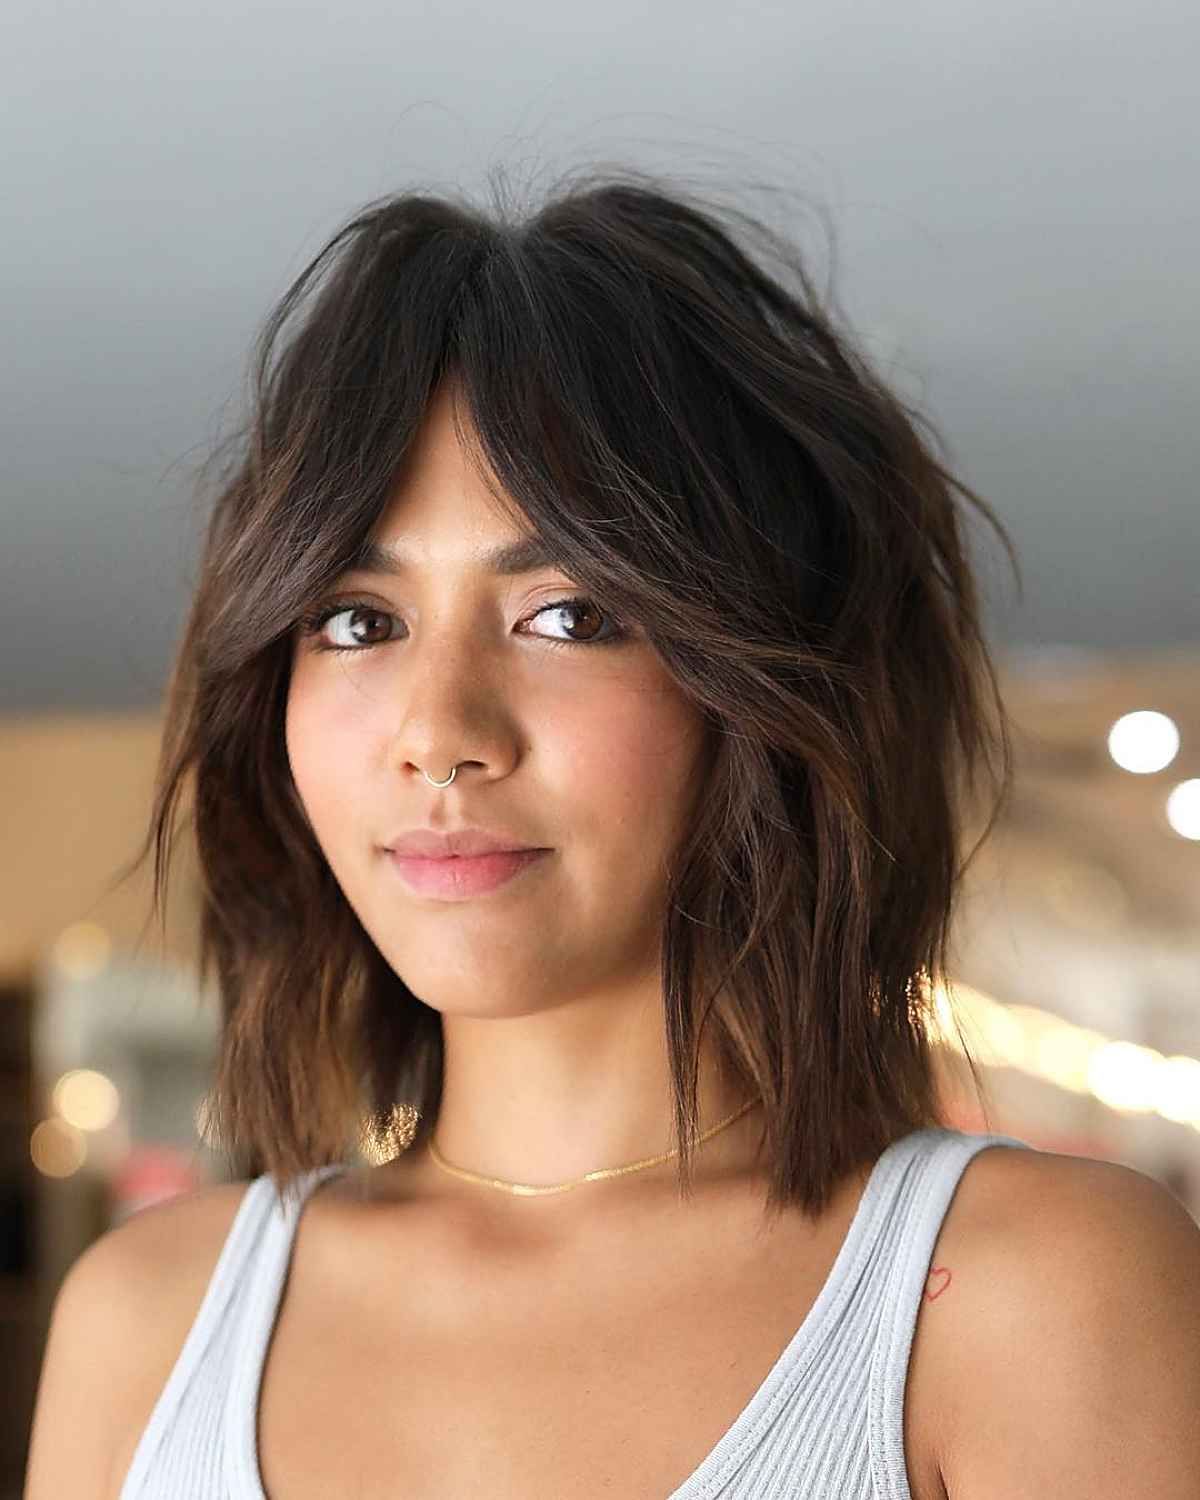 42 Trendiest Long Bob With Bangs + What To Consider Before Getting This Within Most Recent Lob With Face Framing Bangs (Gallery 9 of 20)